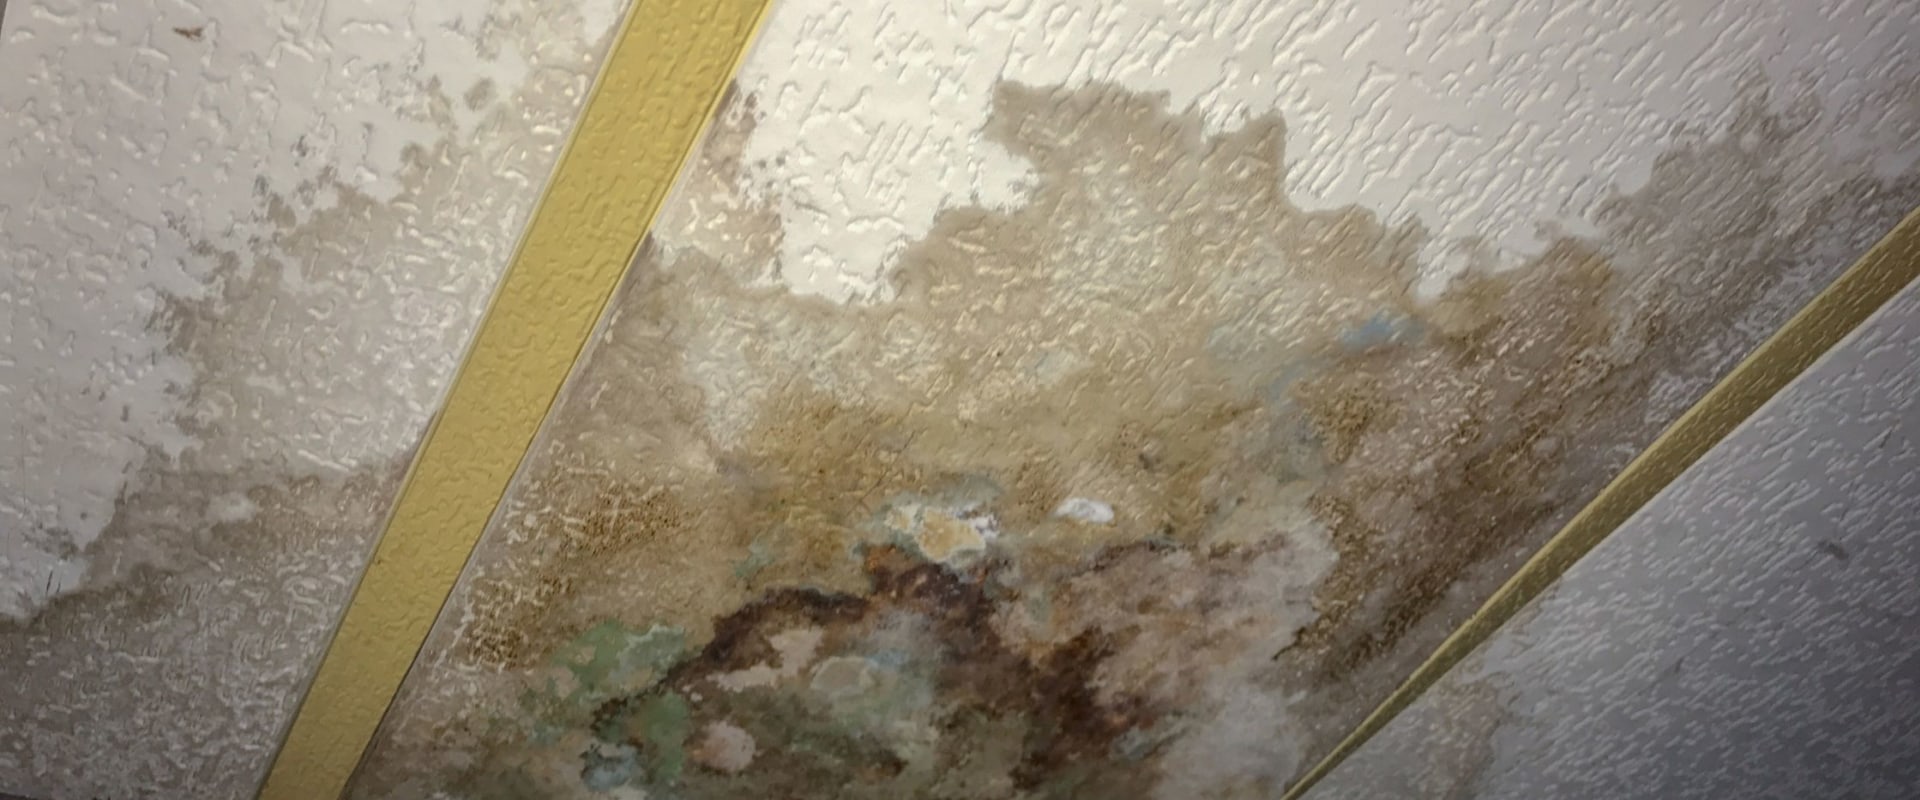 How likely is mold after water damage?